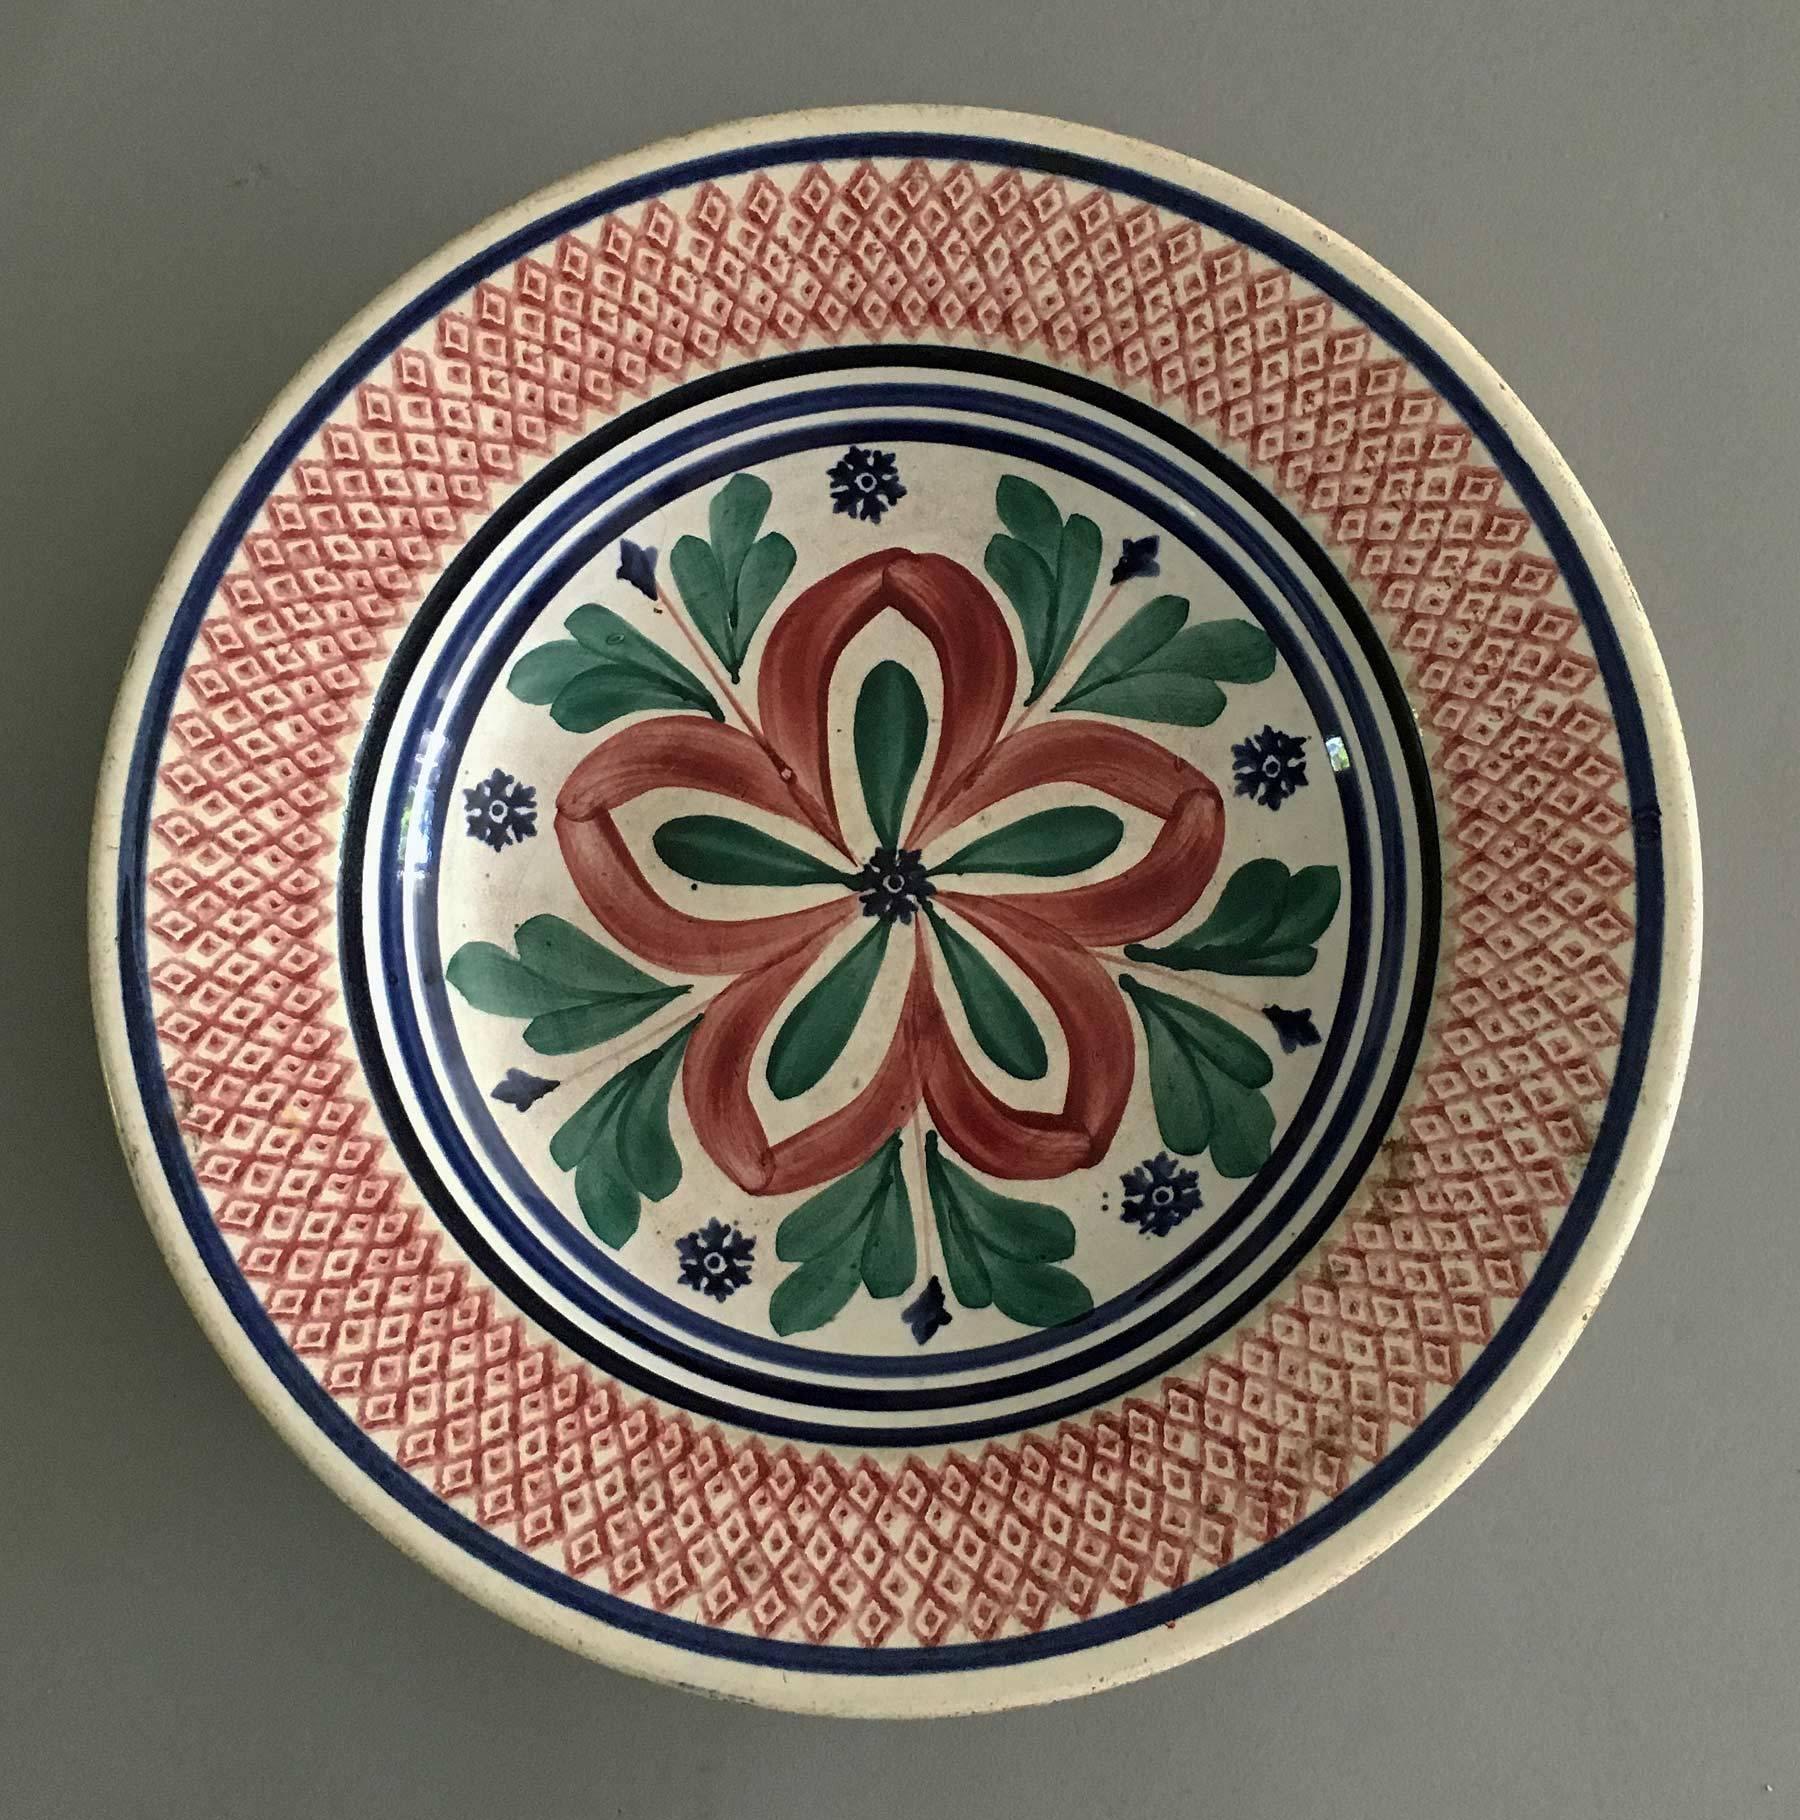 Matched set of four Dutch hand-painted pottery soup or pasta bowls boldly decorated with stylized star flowers in red, green foliage and tiny blue flowers, the wide rims decorated in a diamond diaper pattern, trimmed in blue. One of the backs is